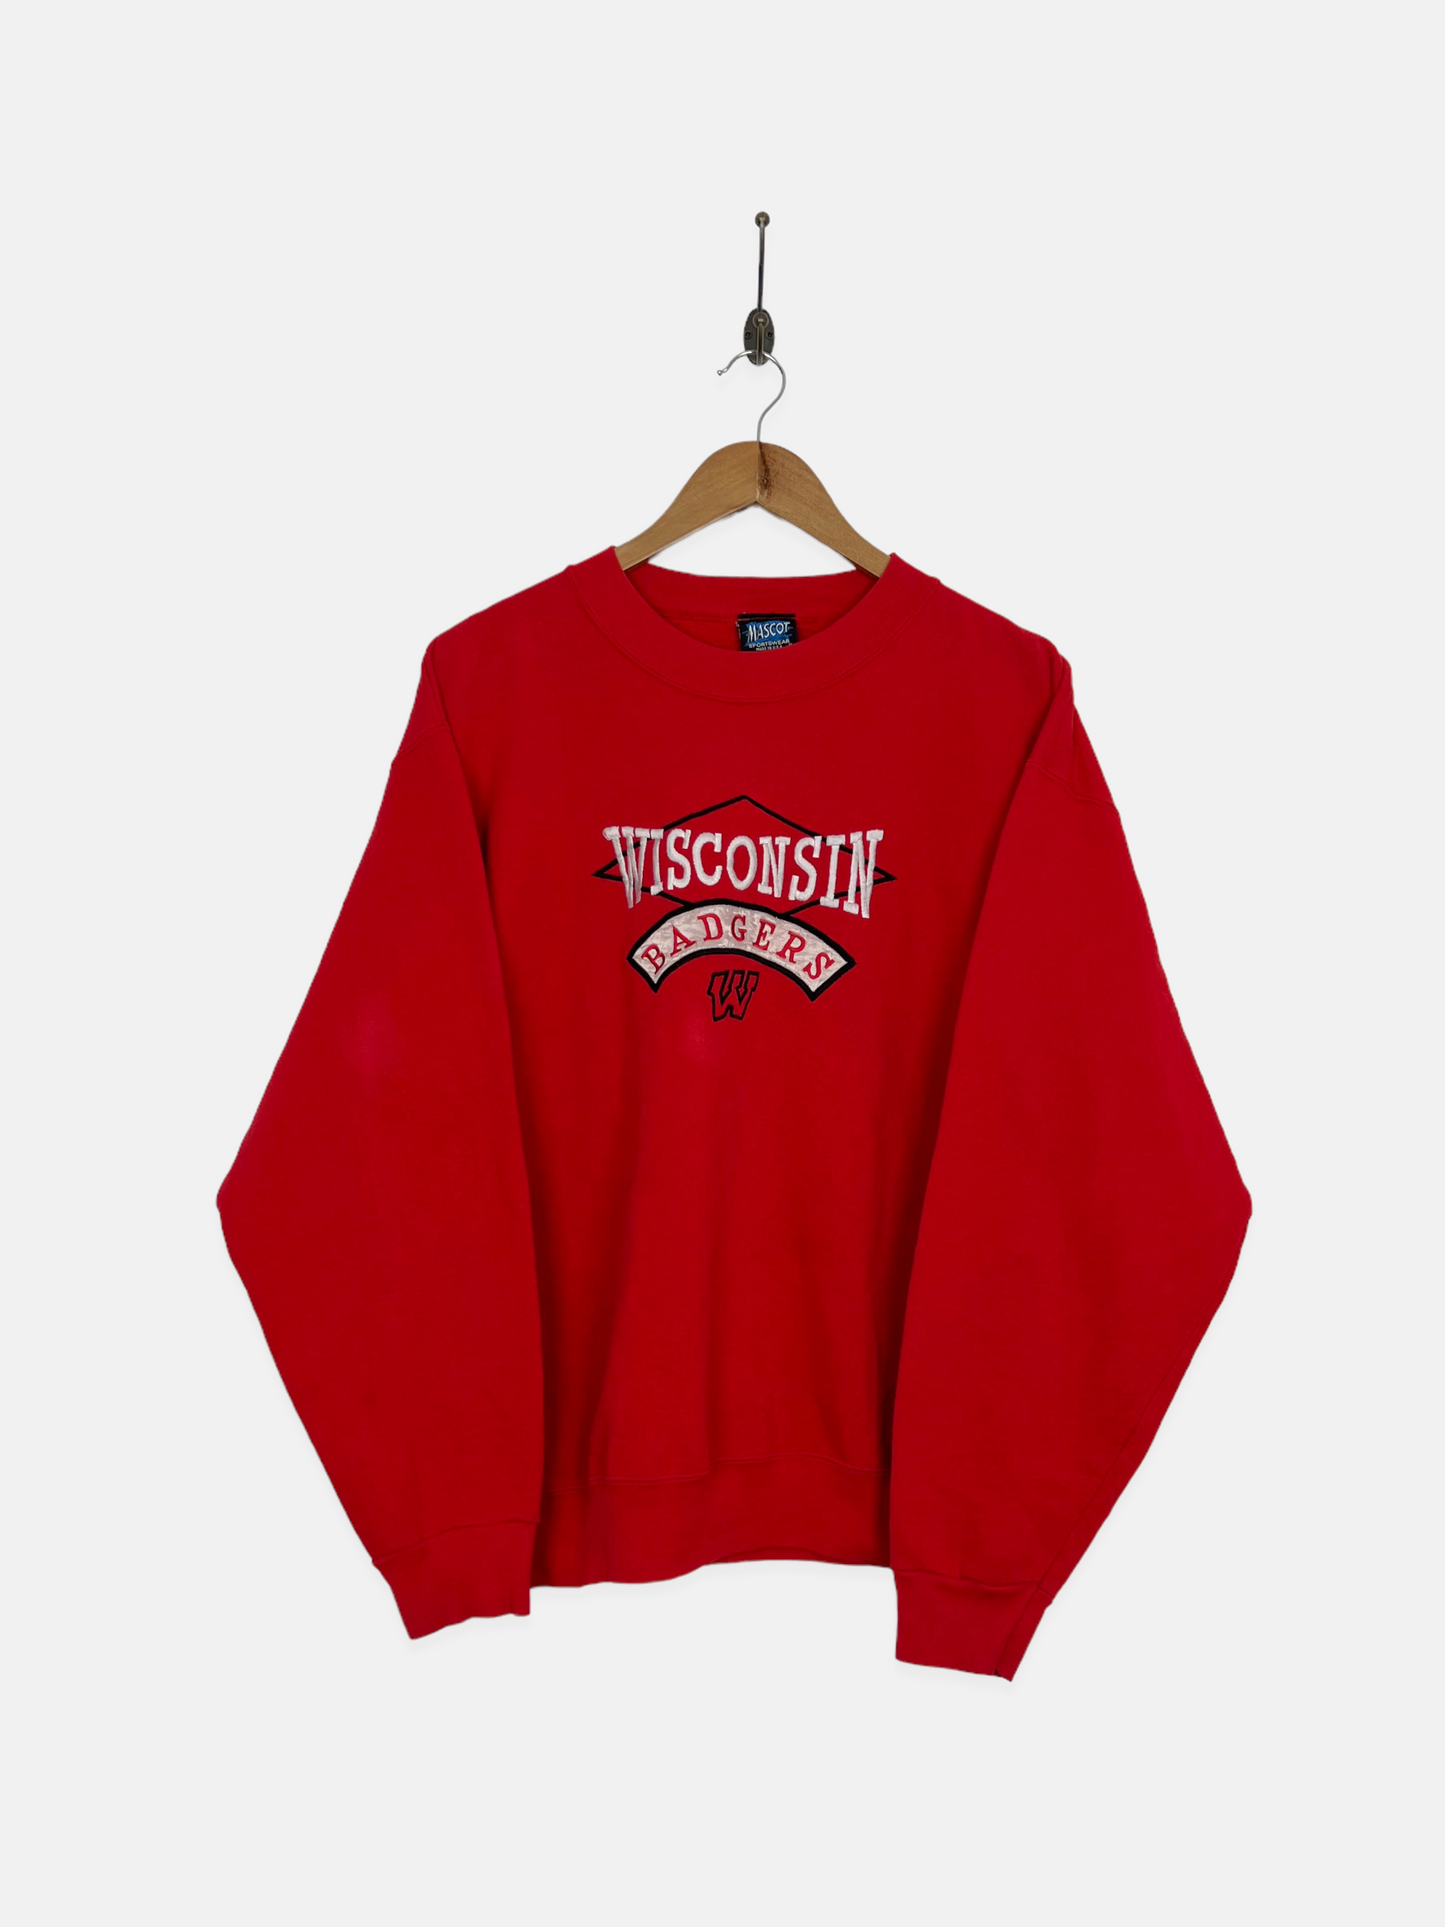 90's Wisconsin Badgers USA Made Embroidered Vintage Sweatshirt Size L